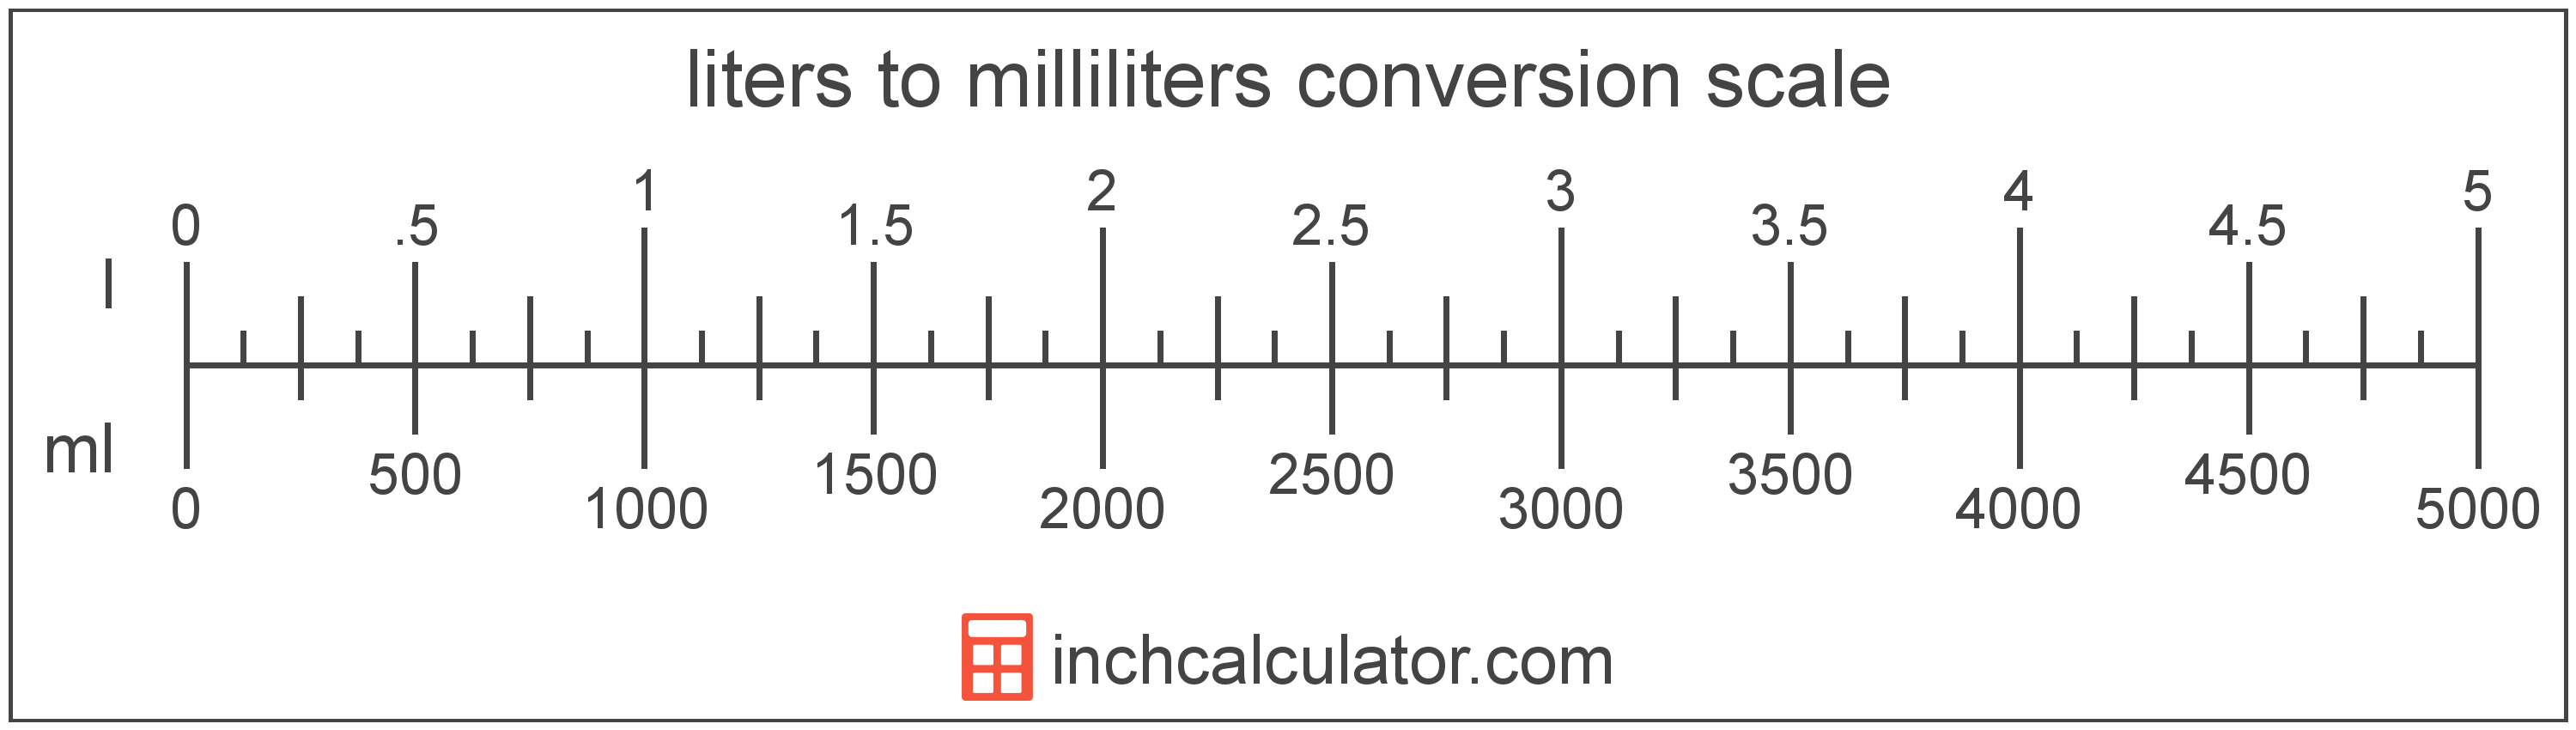 conversion scale showing liters and equivalent milliliters volume values